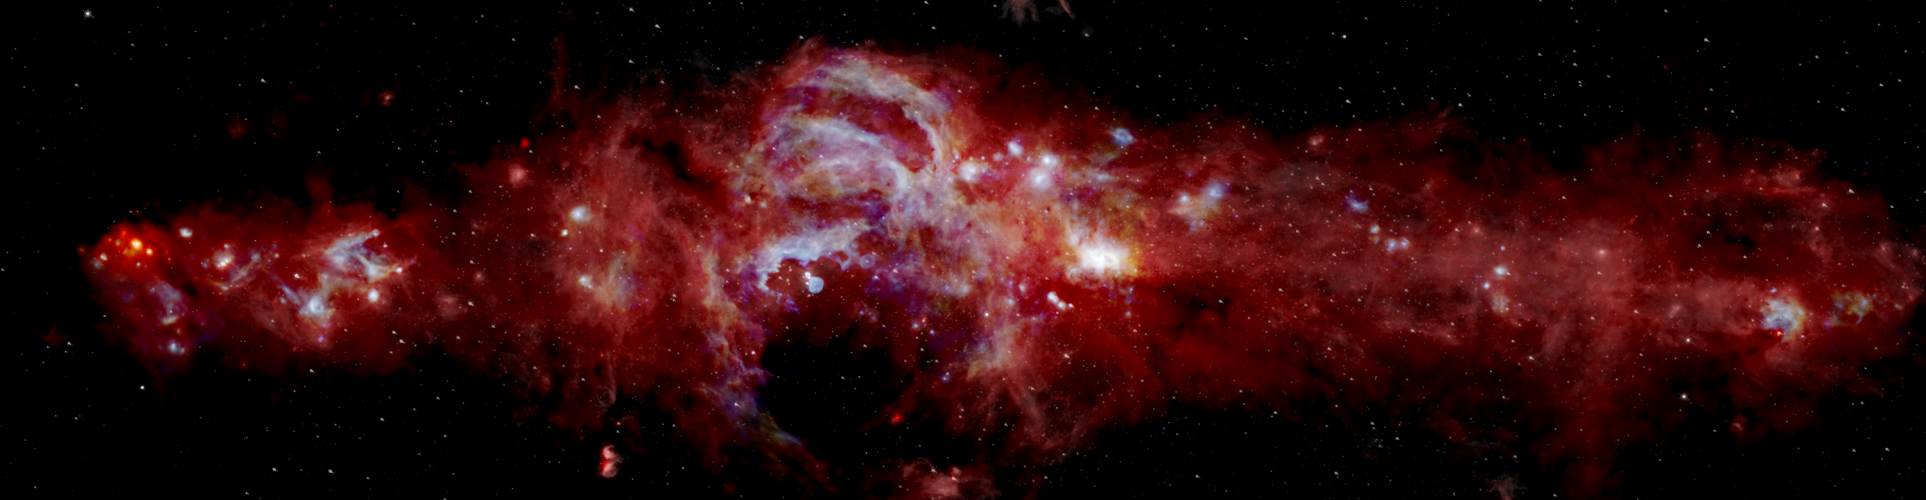 Composite infrared image of the center of our Milky Way Galaxy